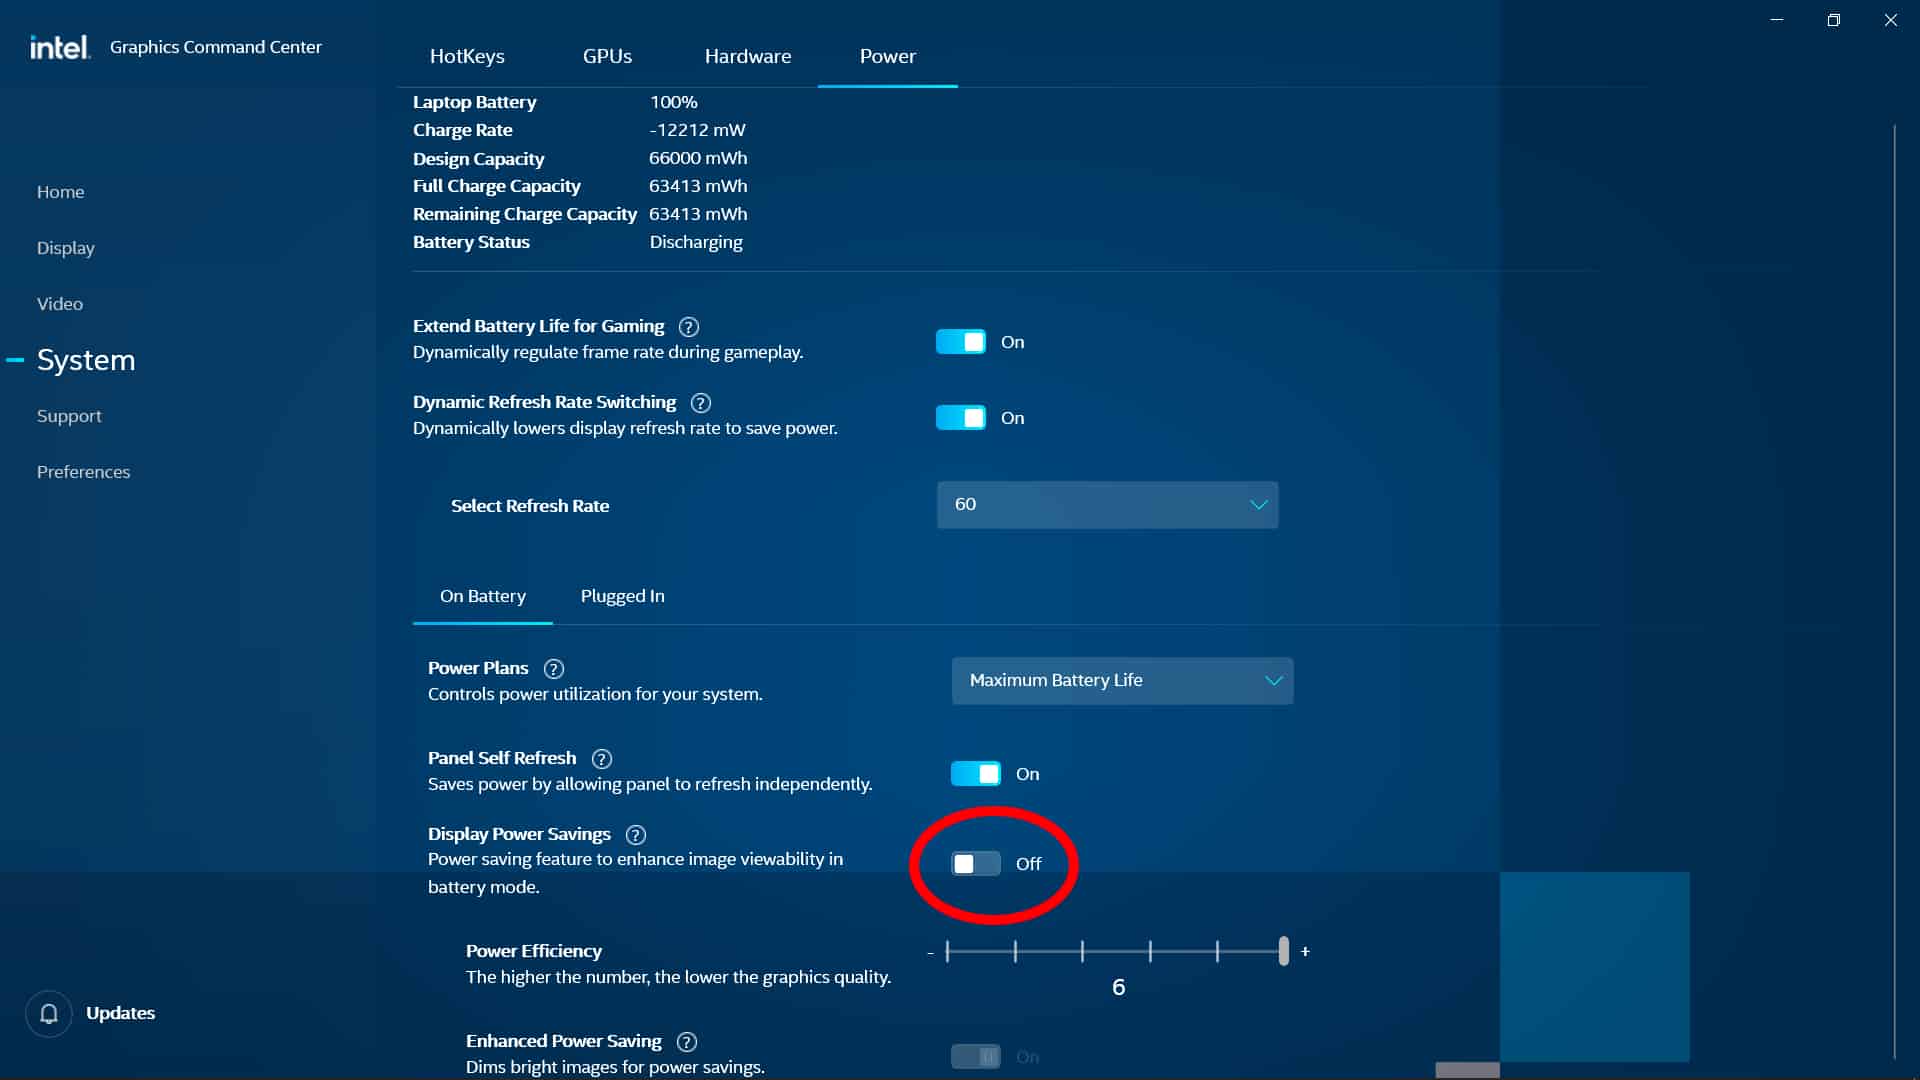 A screenshot indicating how to find and turn off the "Display Power Savings" setting in the Intel Graphics Command Center.